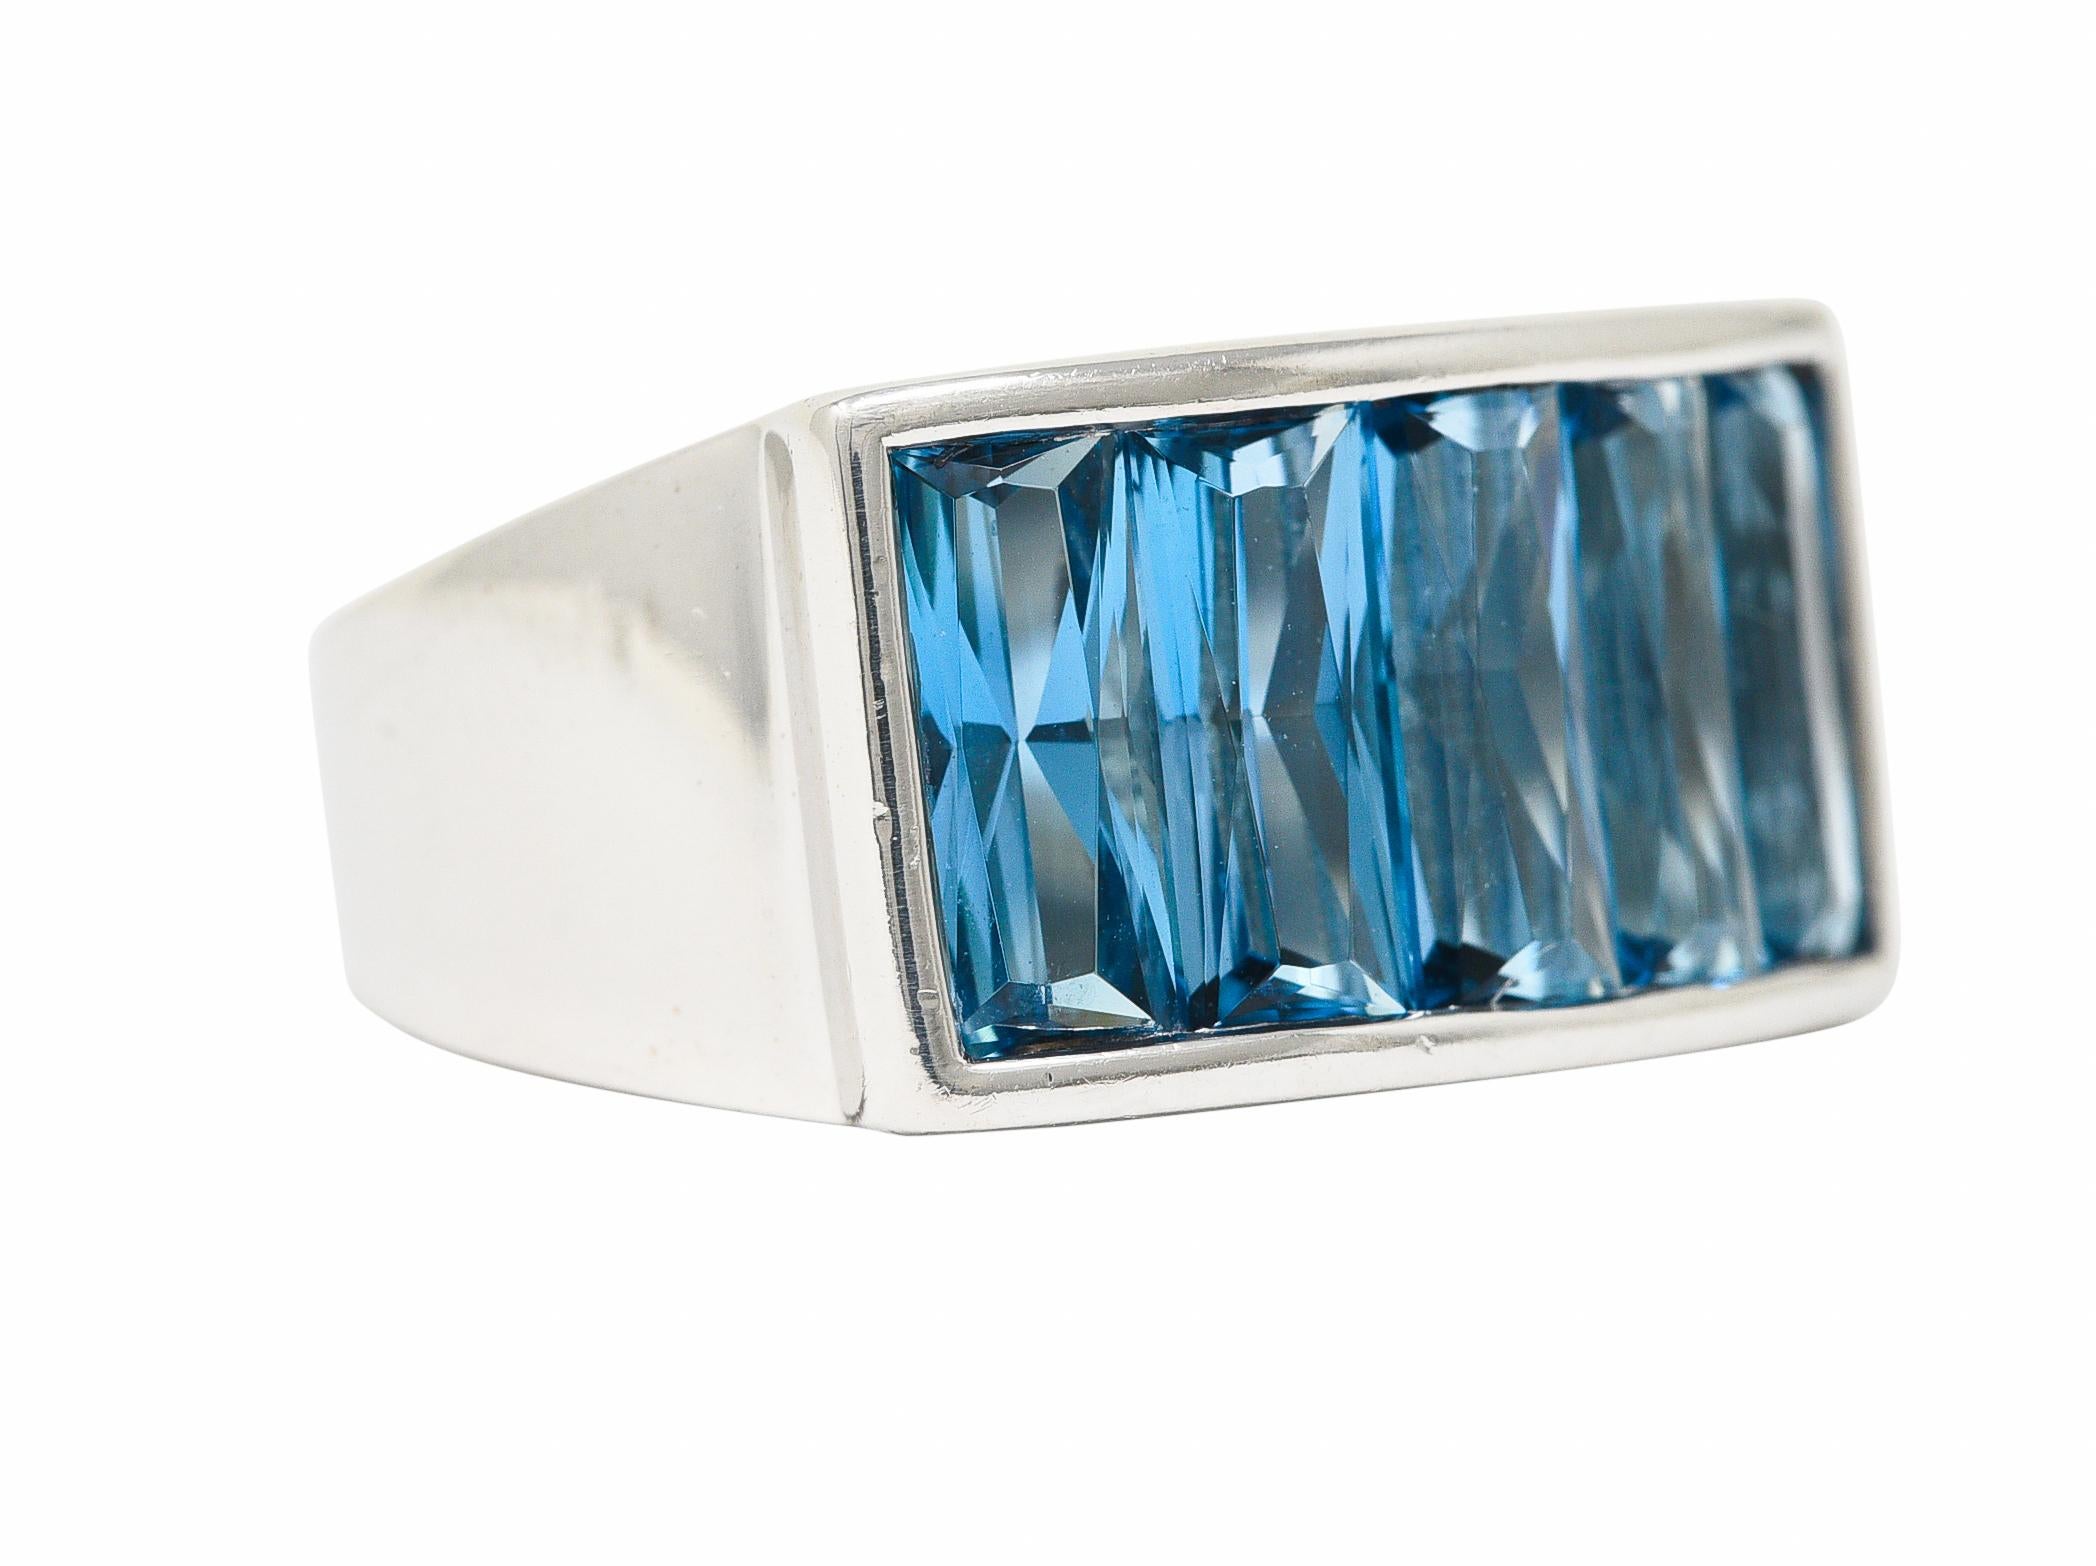 Centering five French cut topazes weighing approximately 5.00 carat total. Transparent bright blue in color with light saturation. Set East to West in a raised channel. With high polish surround and tapered shank. Stamped 750 for 18 karat gold. With